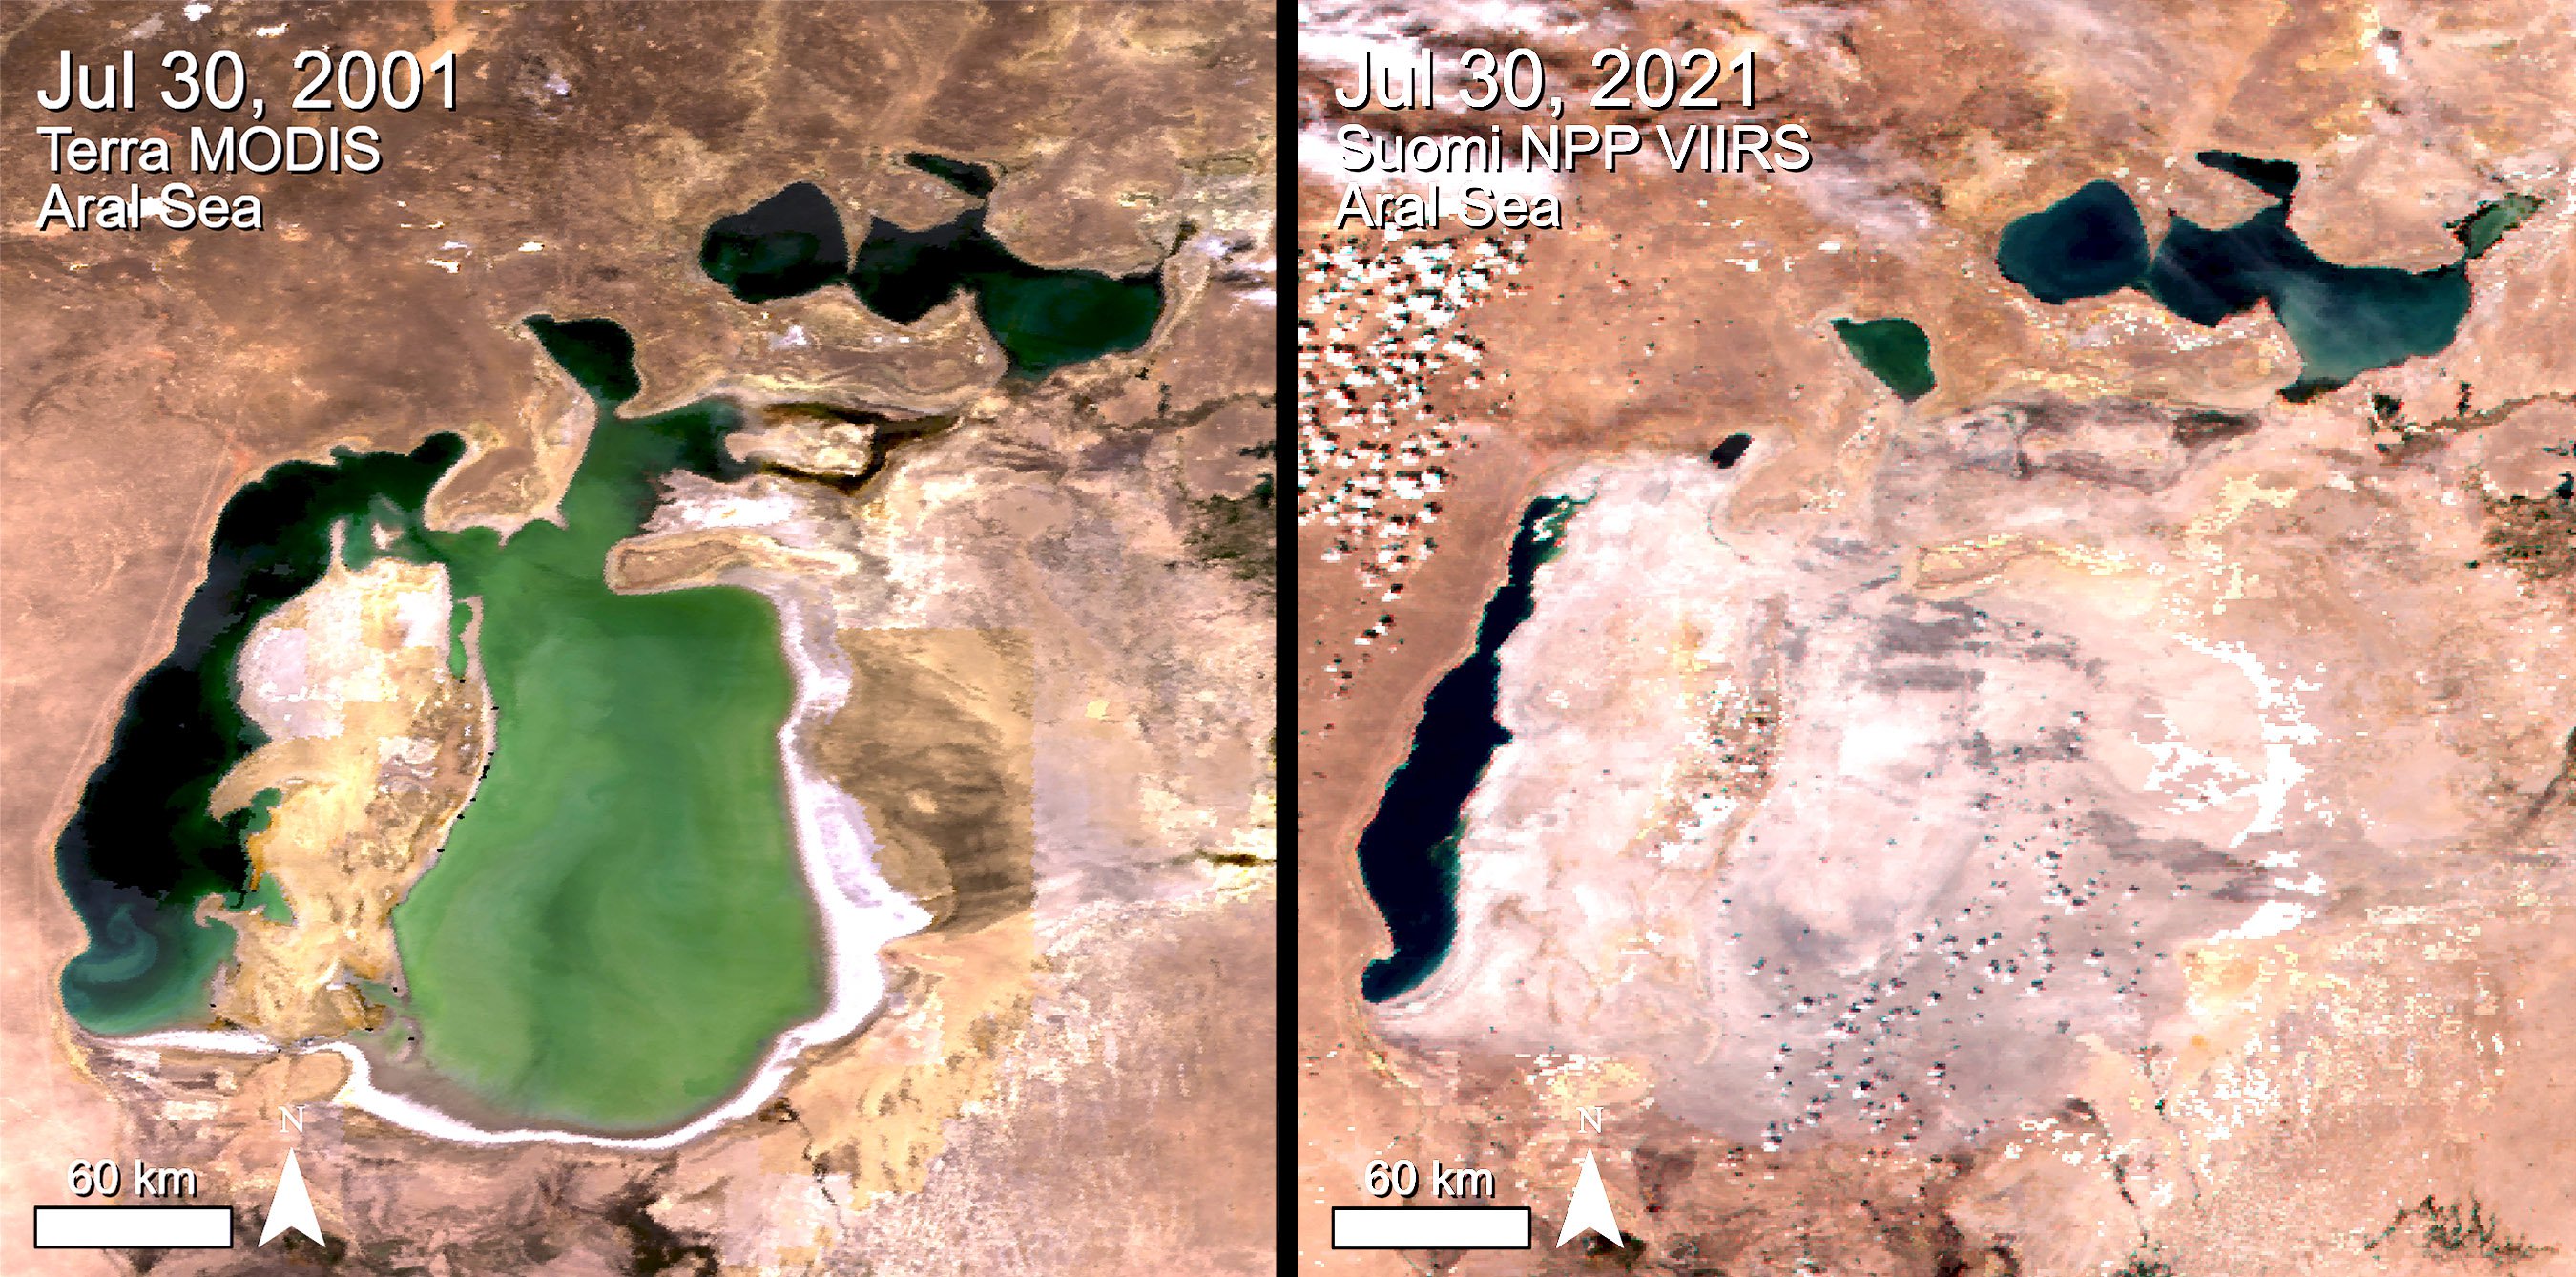 A side by side comparison of the Aral Sea from 2001 using Terra MODIS data and 2021 using Suomi NPP VIIRS data. A large amount of water has disappeared in the 2021 image.